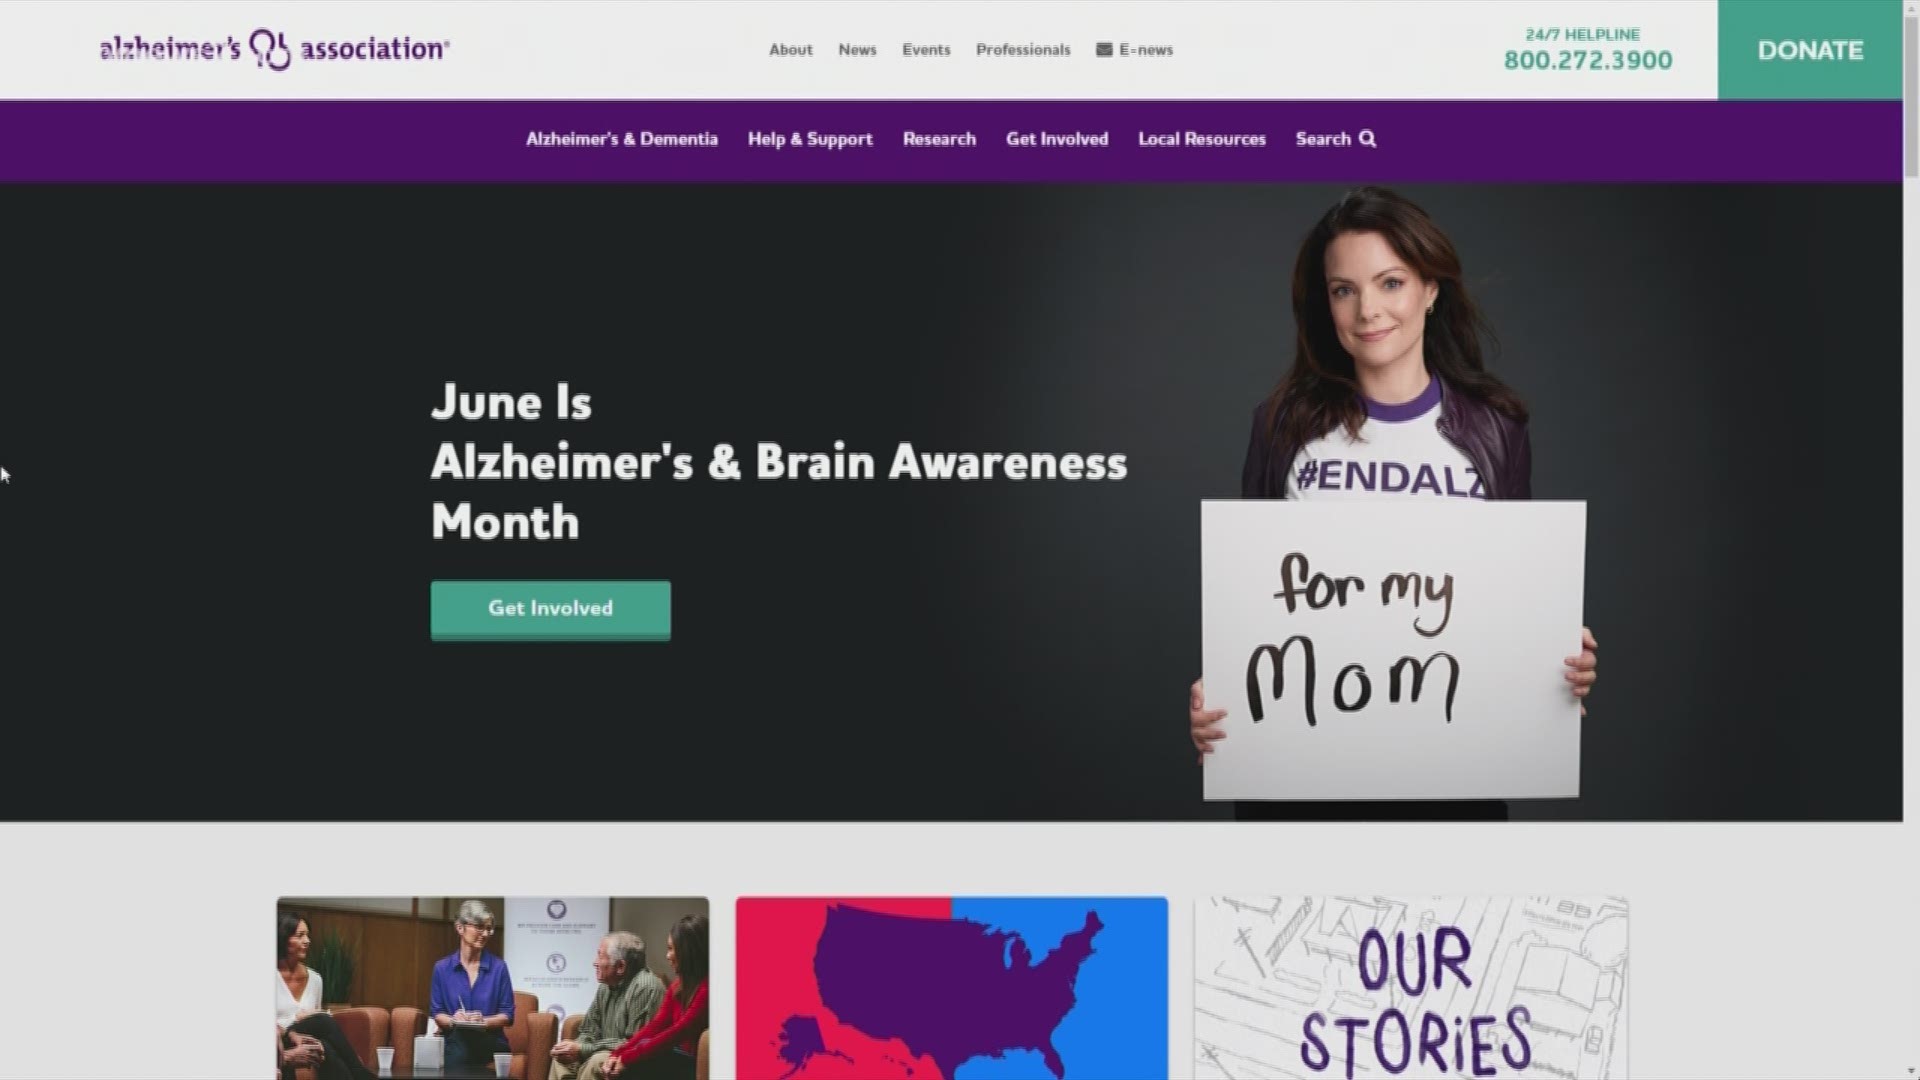 June is Alzheimer’s Awareness and Brain Health Month.  Get support and information at www.alz.org.